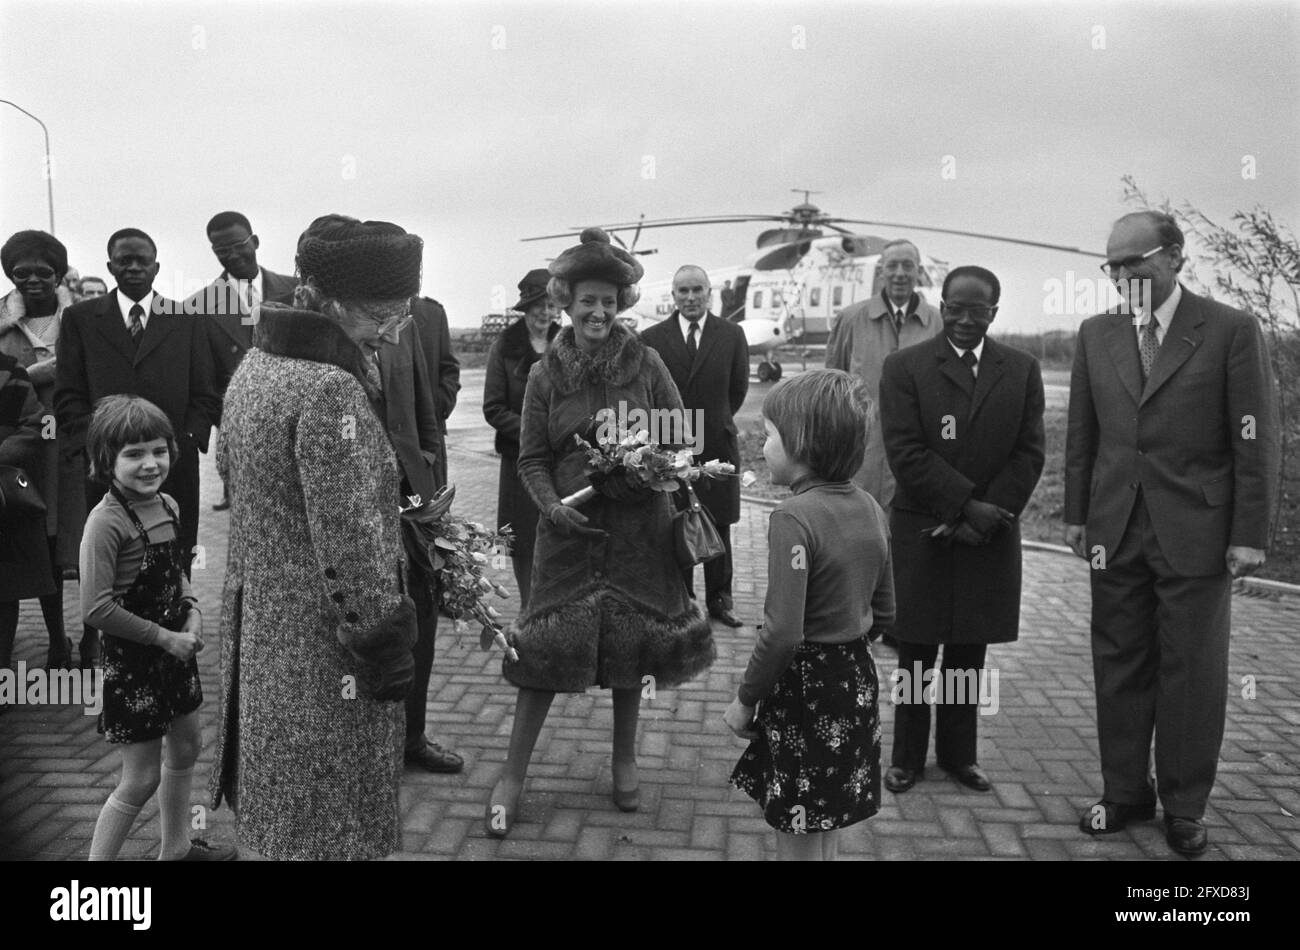 President Senghor (Senegal) visits Central Workshop for the Rijksdienst IJsselmeerpolders in Lelystad, October 23, 1974, Presidents, state visits, The Netherlands, 20th century press agency photo, news to remember, documentary, historic photography 1945-1990, visual stories, human history of the Twentieth Century, capturing moments in time Stock Photo